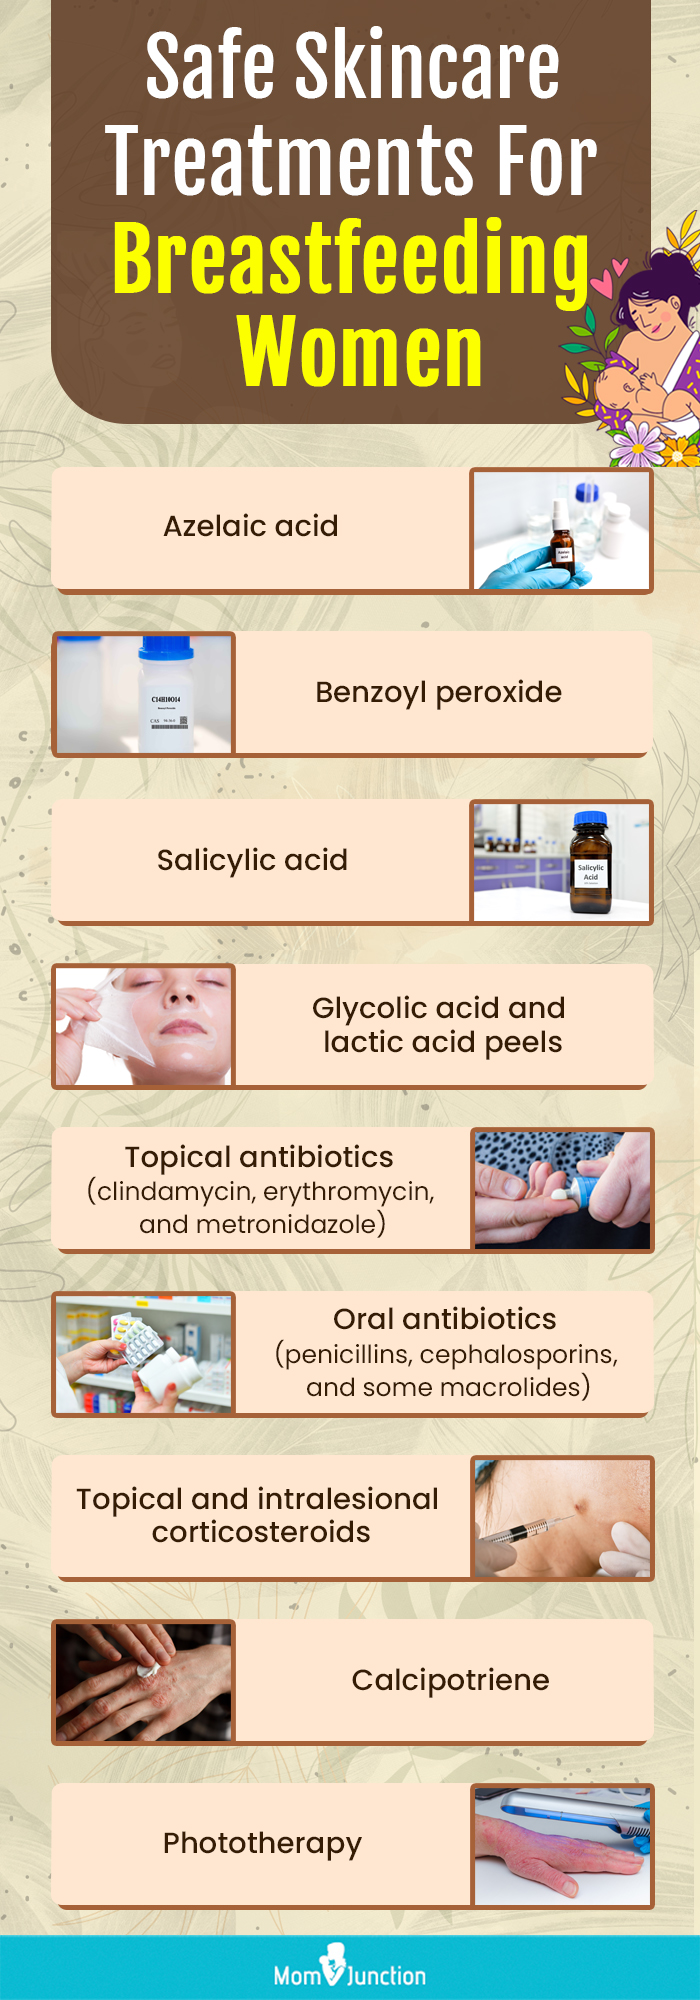 safe skincare treatments for breastfeeding women (infographic)